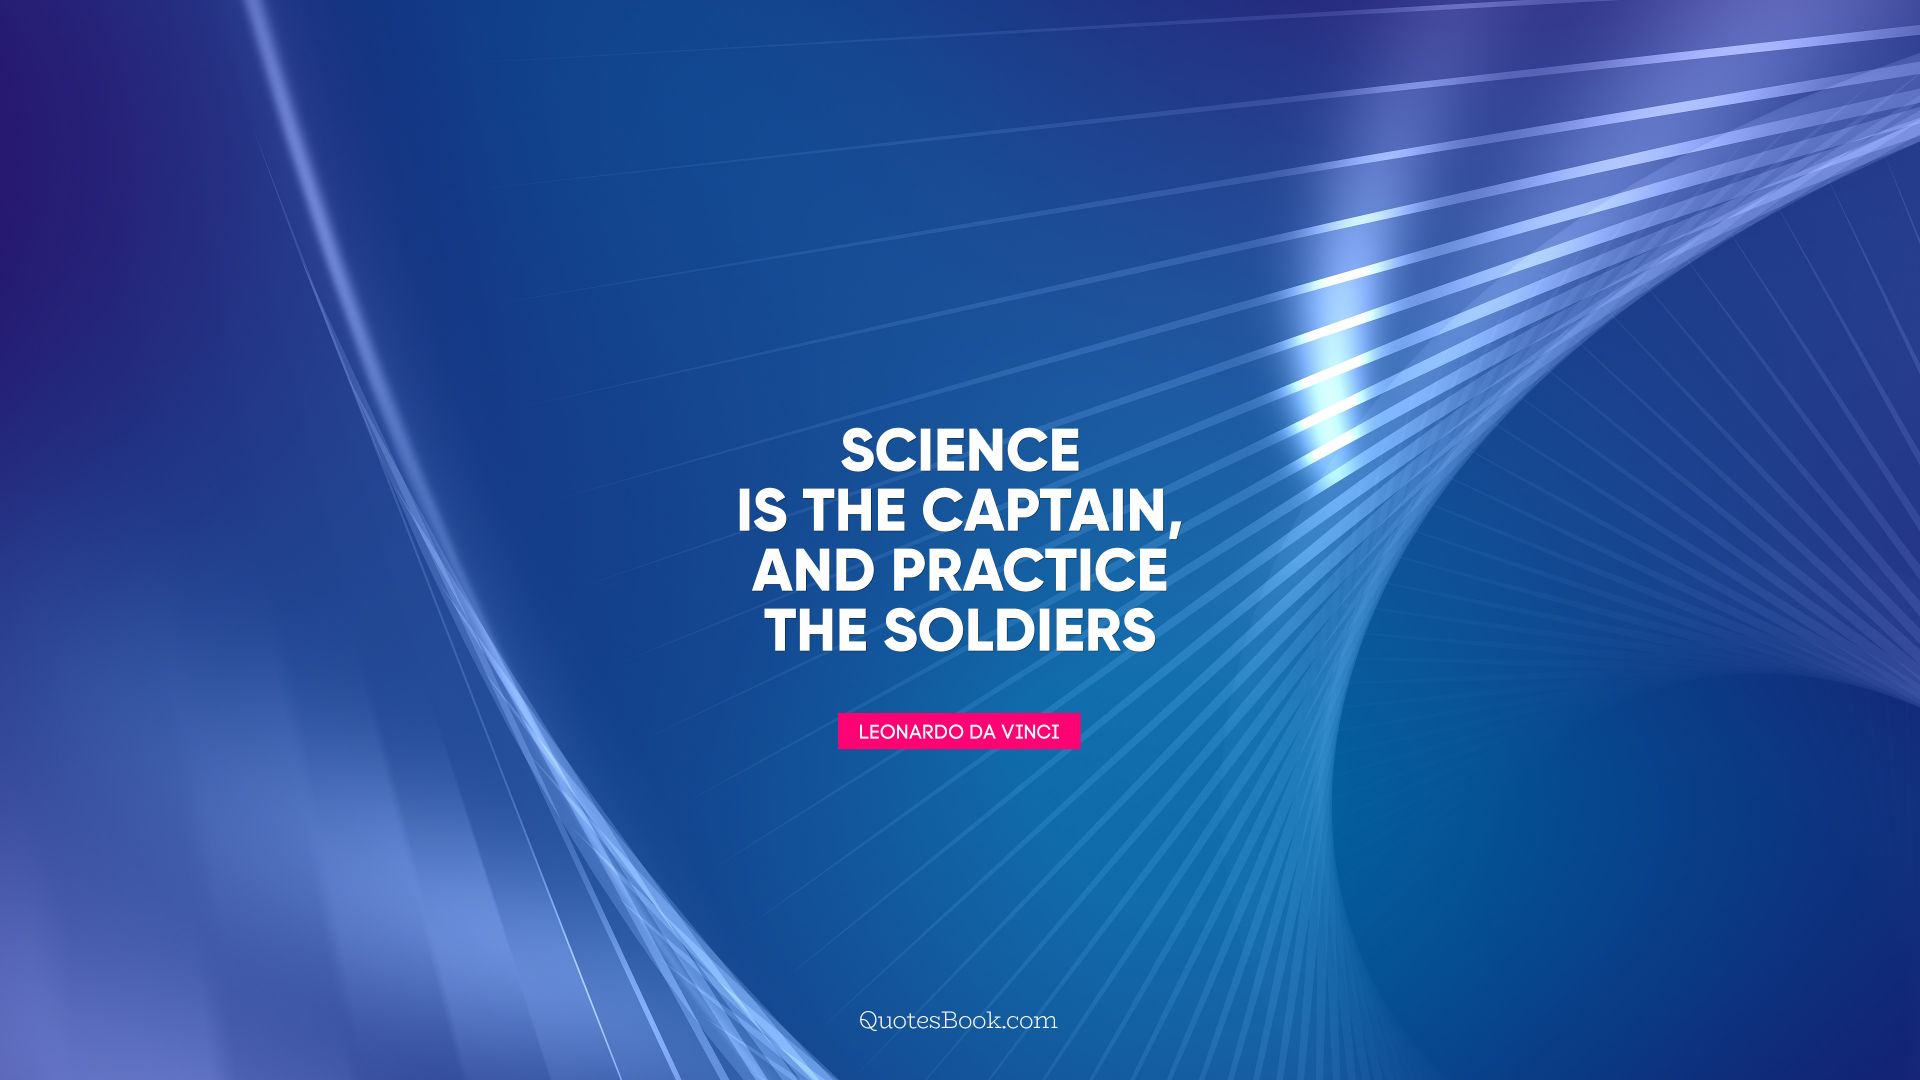 Science is the captain, and practice the soldiers. - Quote by Leonardo da Vinci